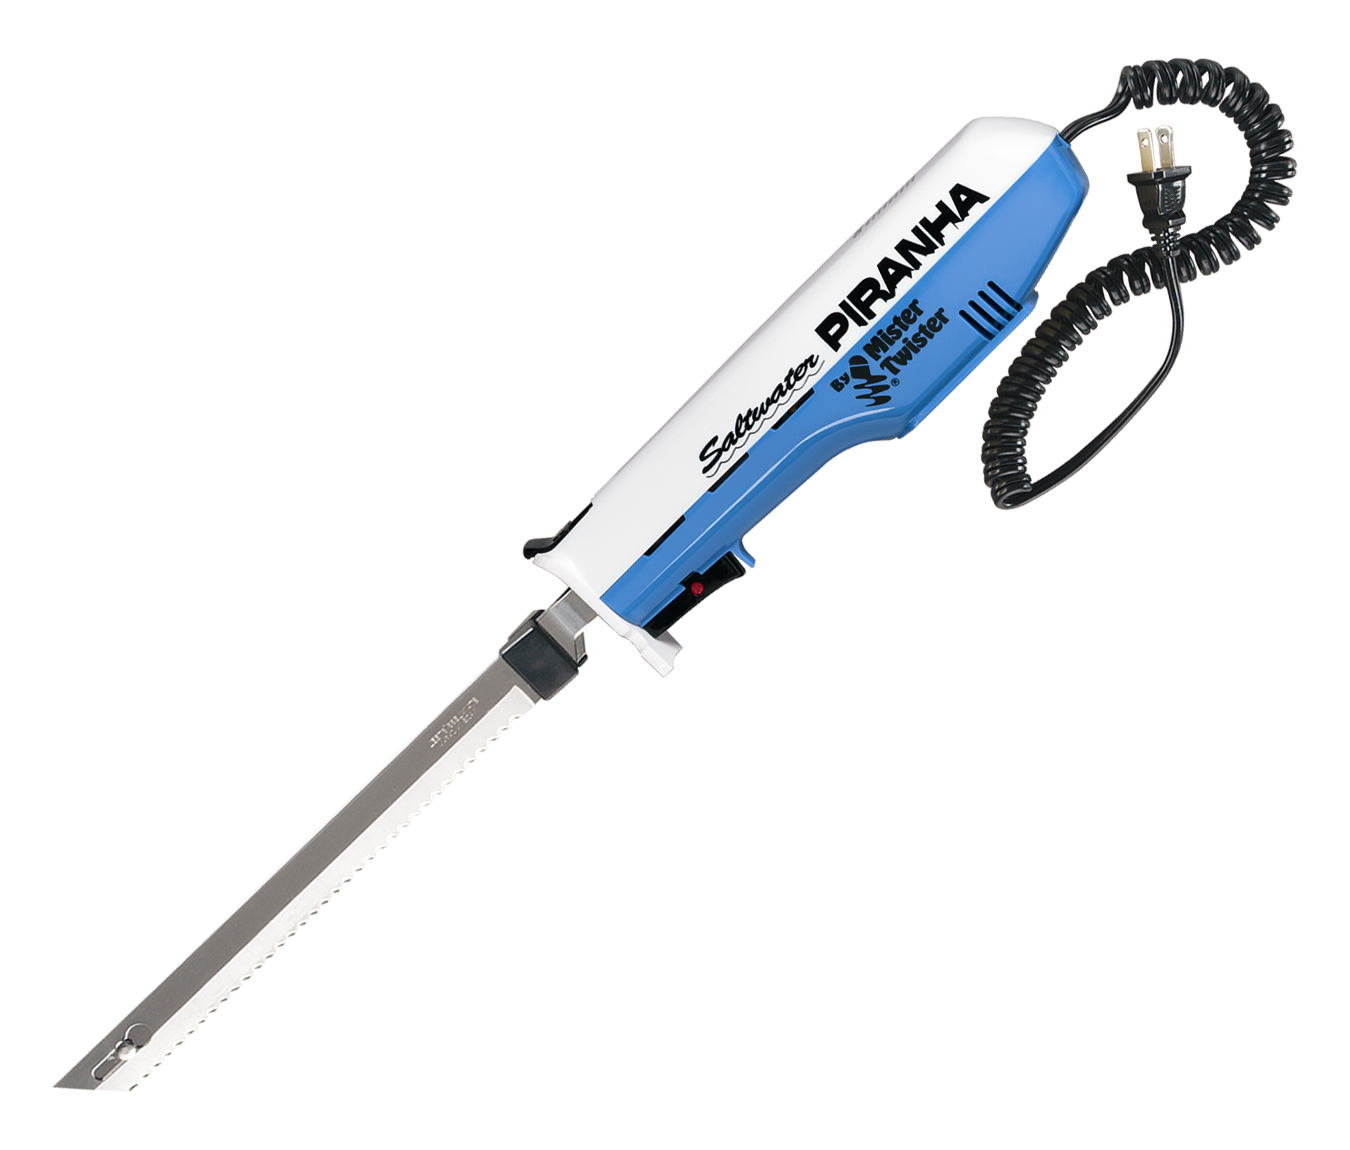 American Angler PRO Stainless Steel Electric Fillet Knife With 8